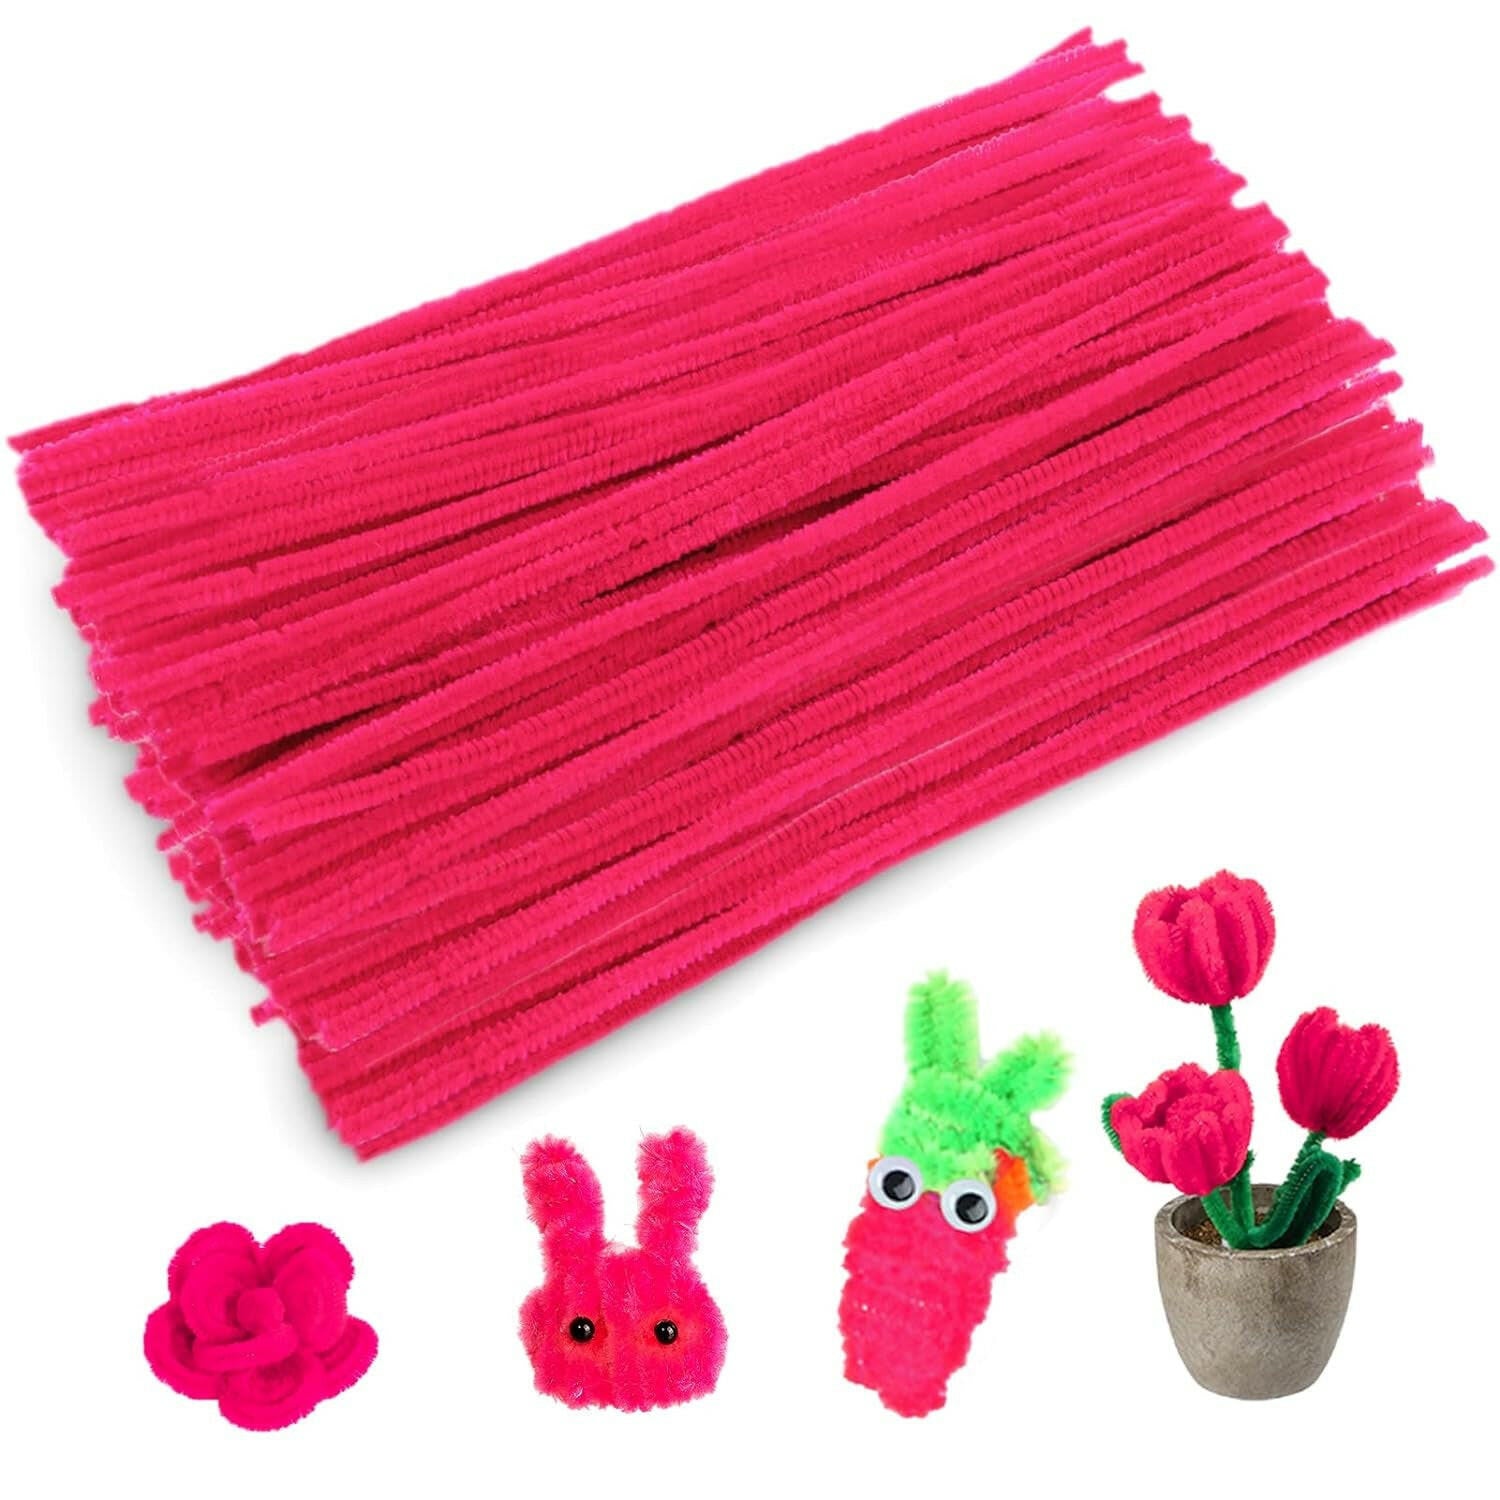 400 Pieces Pipe Cleaners Craft Chenille Stems for Kids DIY Art and Craft  Projects Decorations, 6Mm X 12Inch